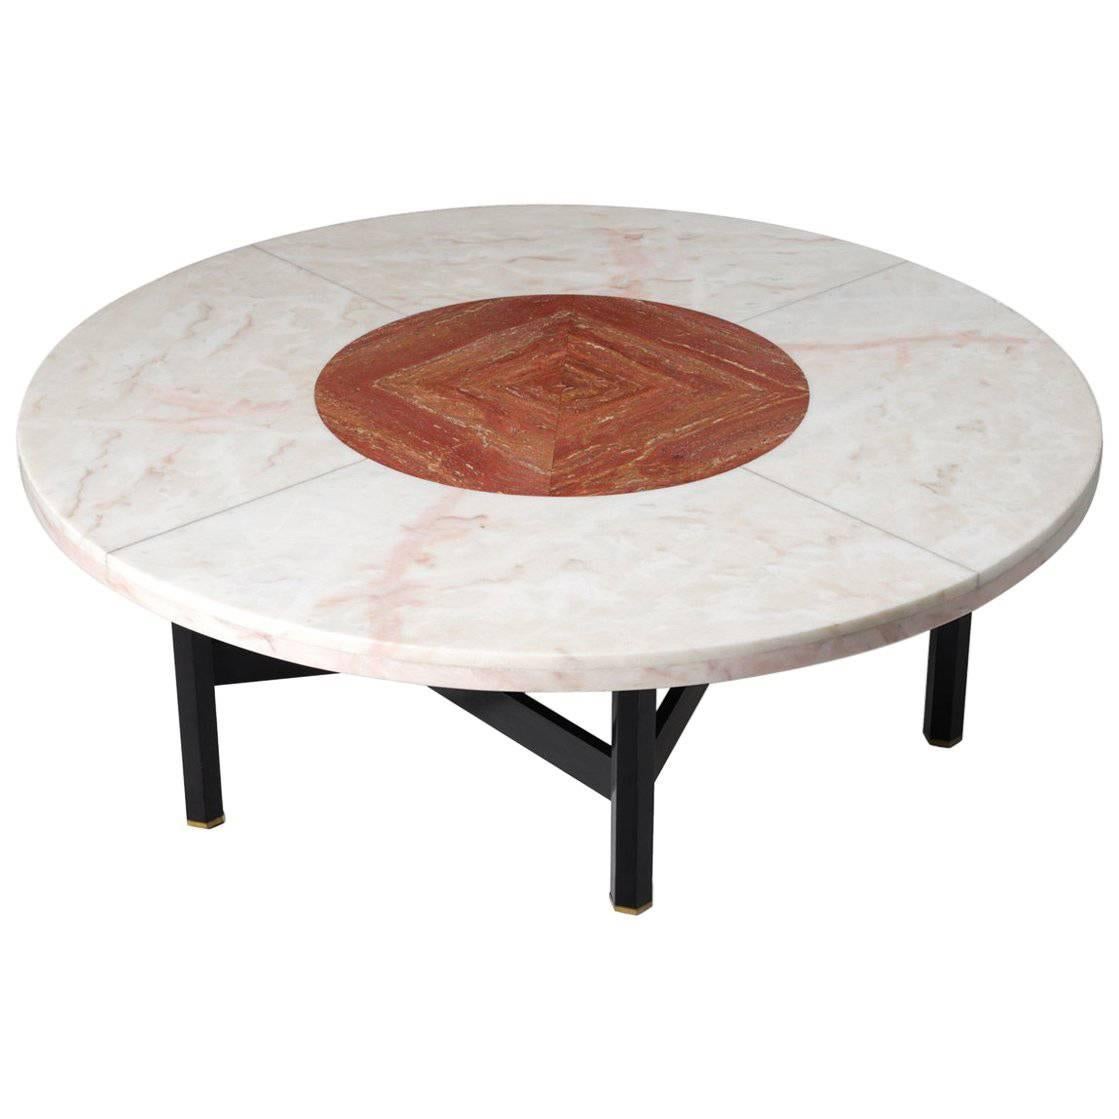 Jan Vlug Rare Large Coffee Table with Round Marble Top